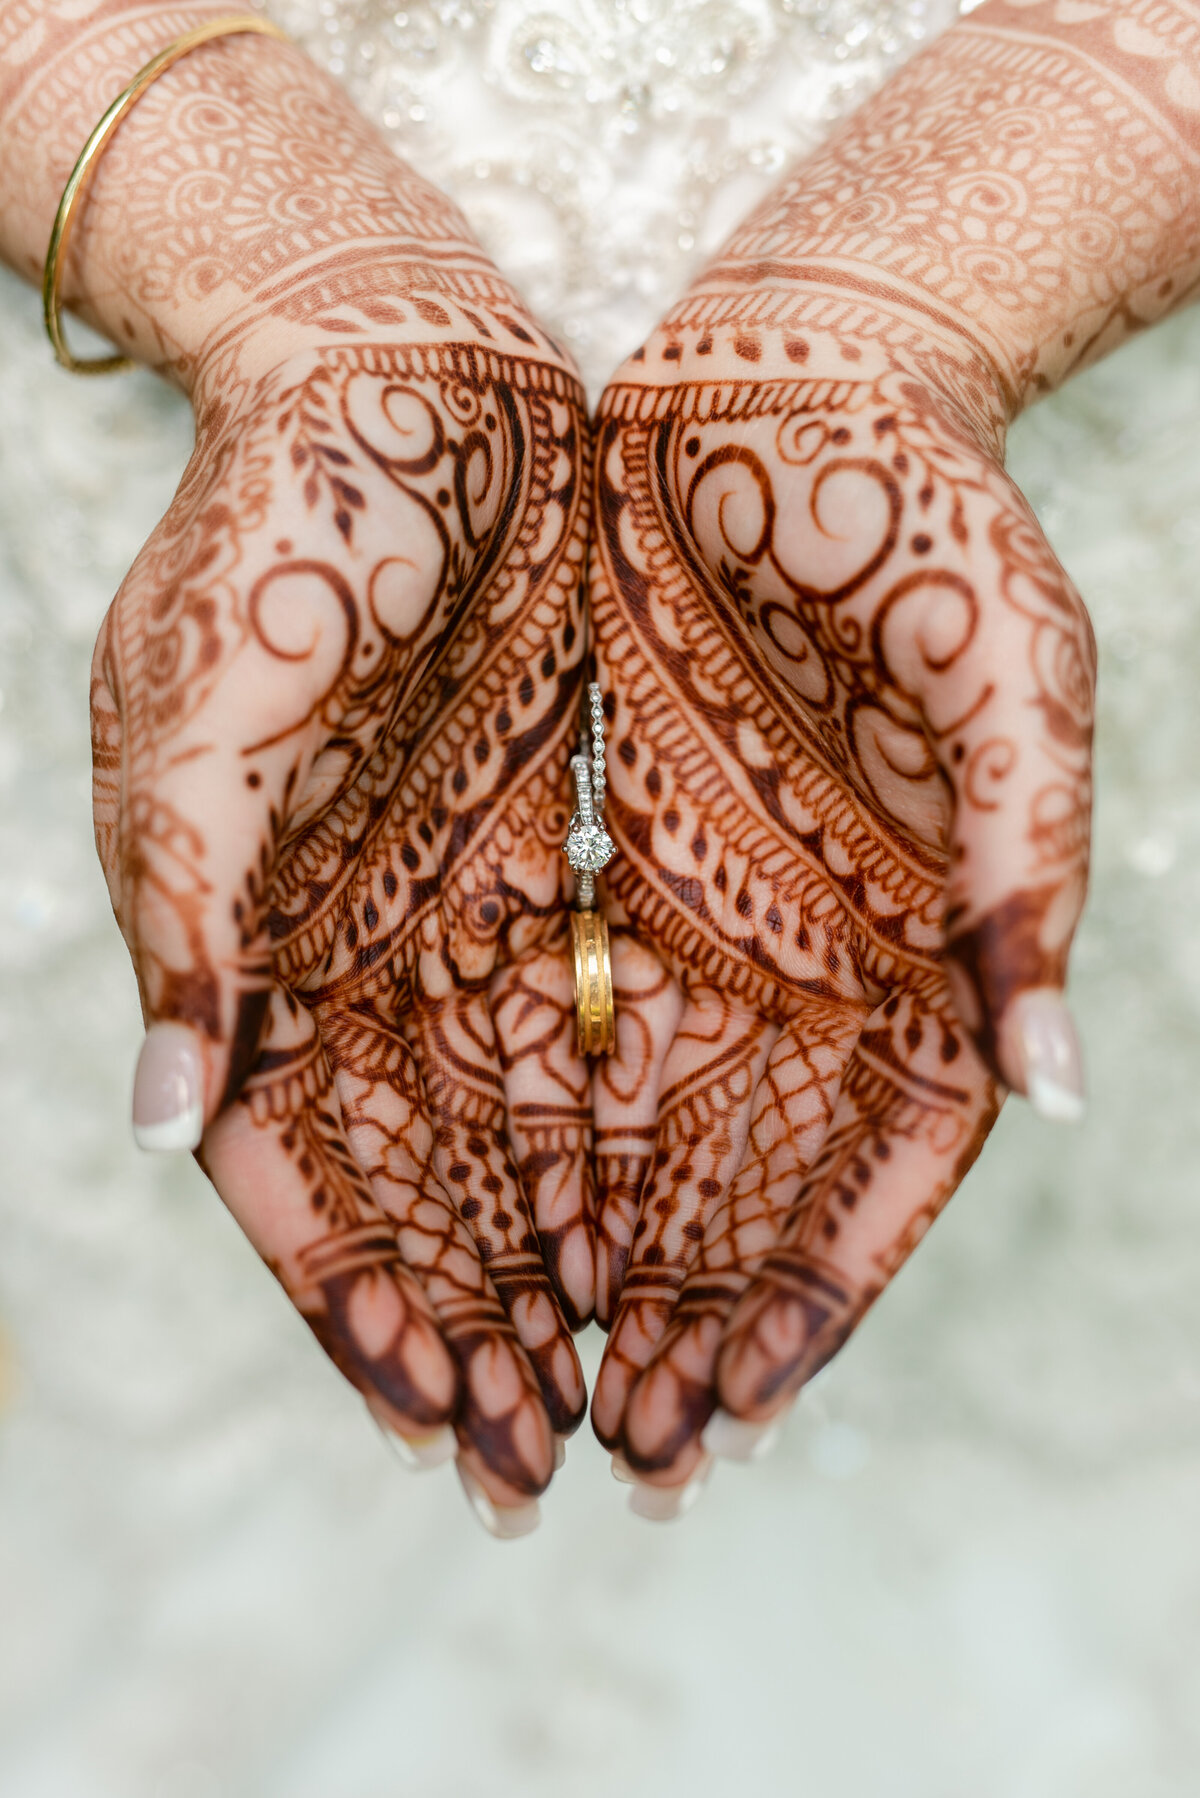 Bride holding wedding rings after henna ceremony.